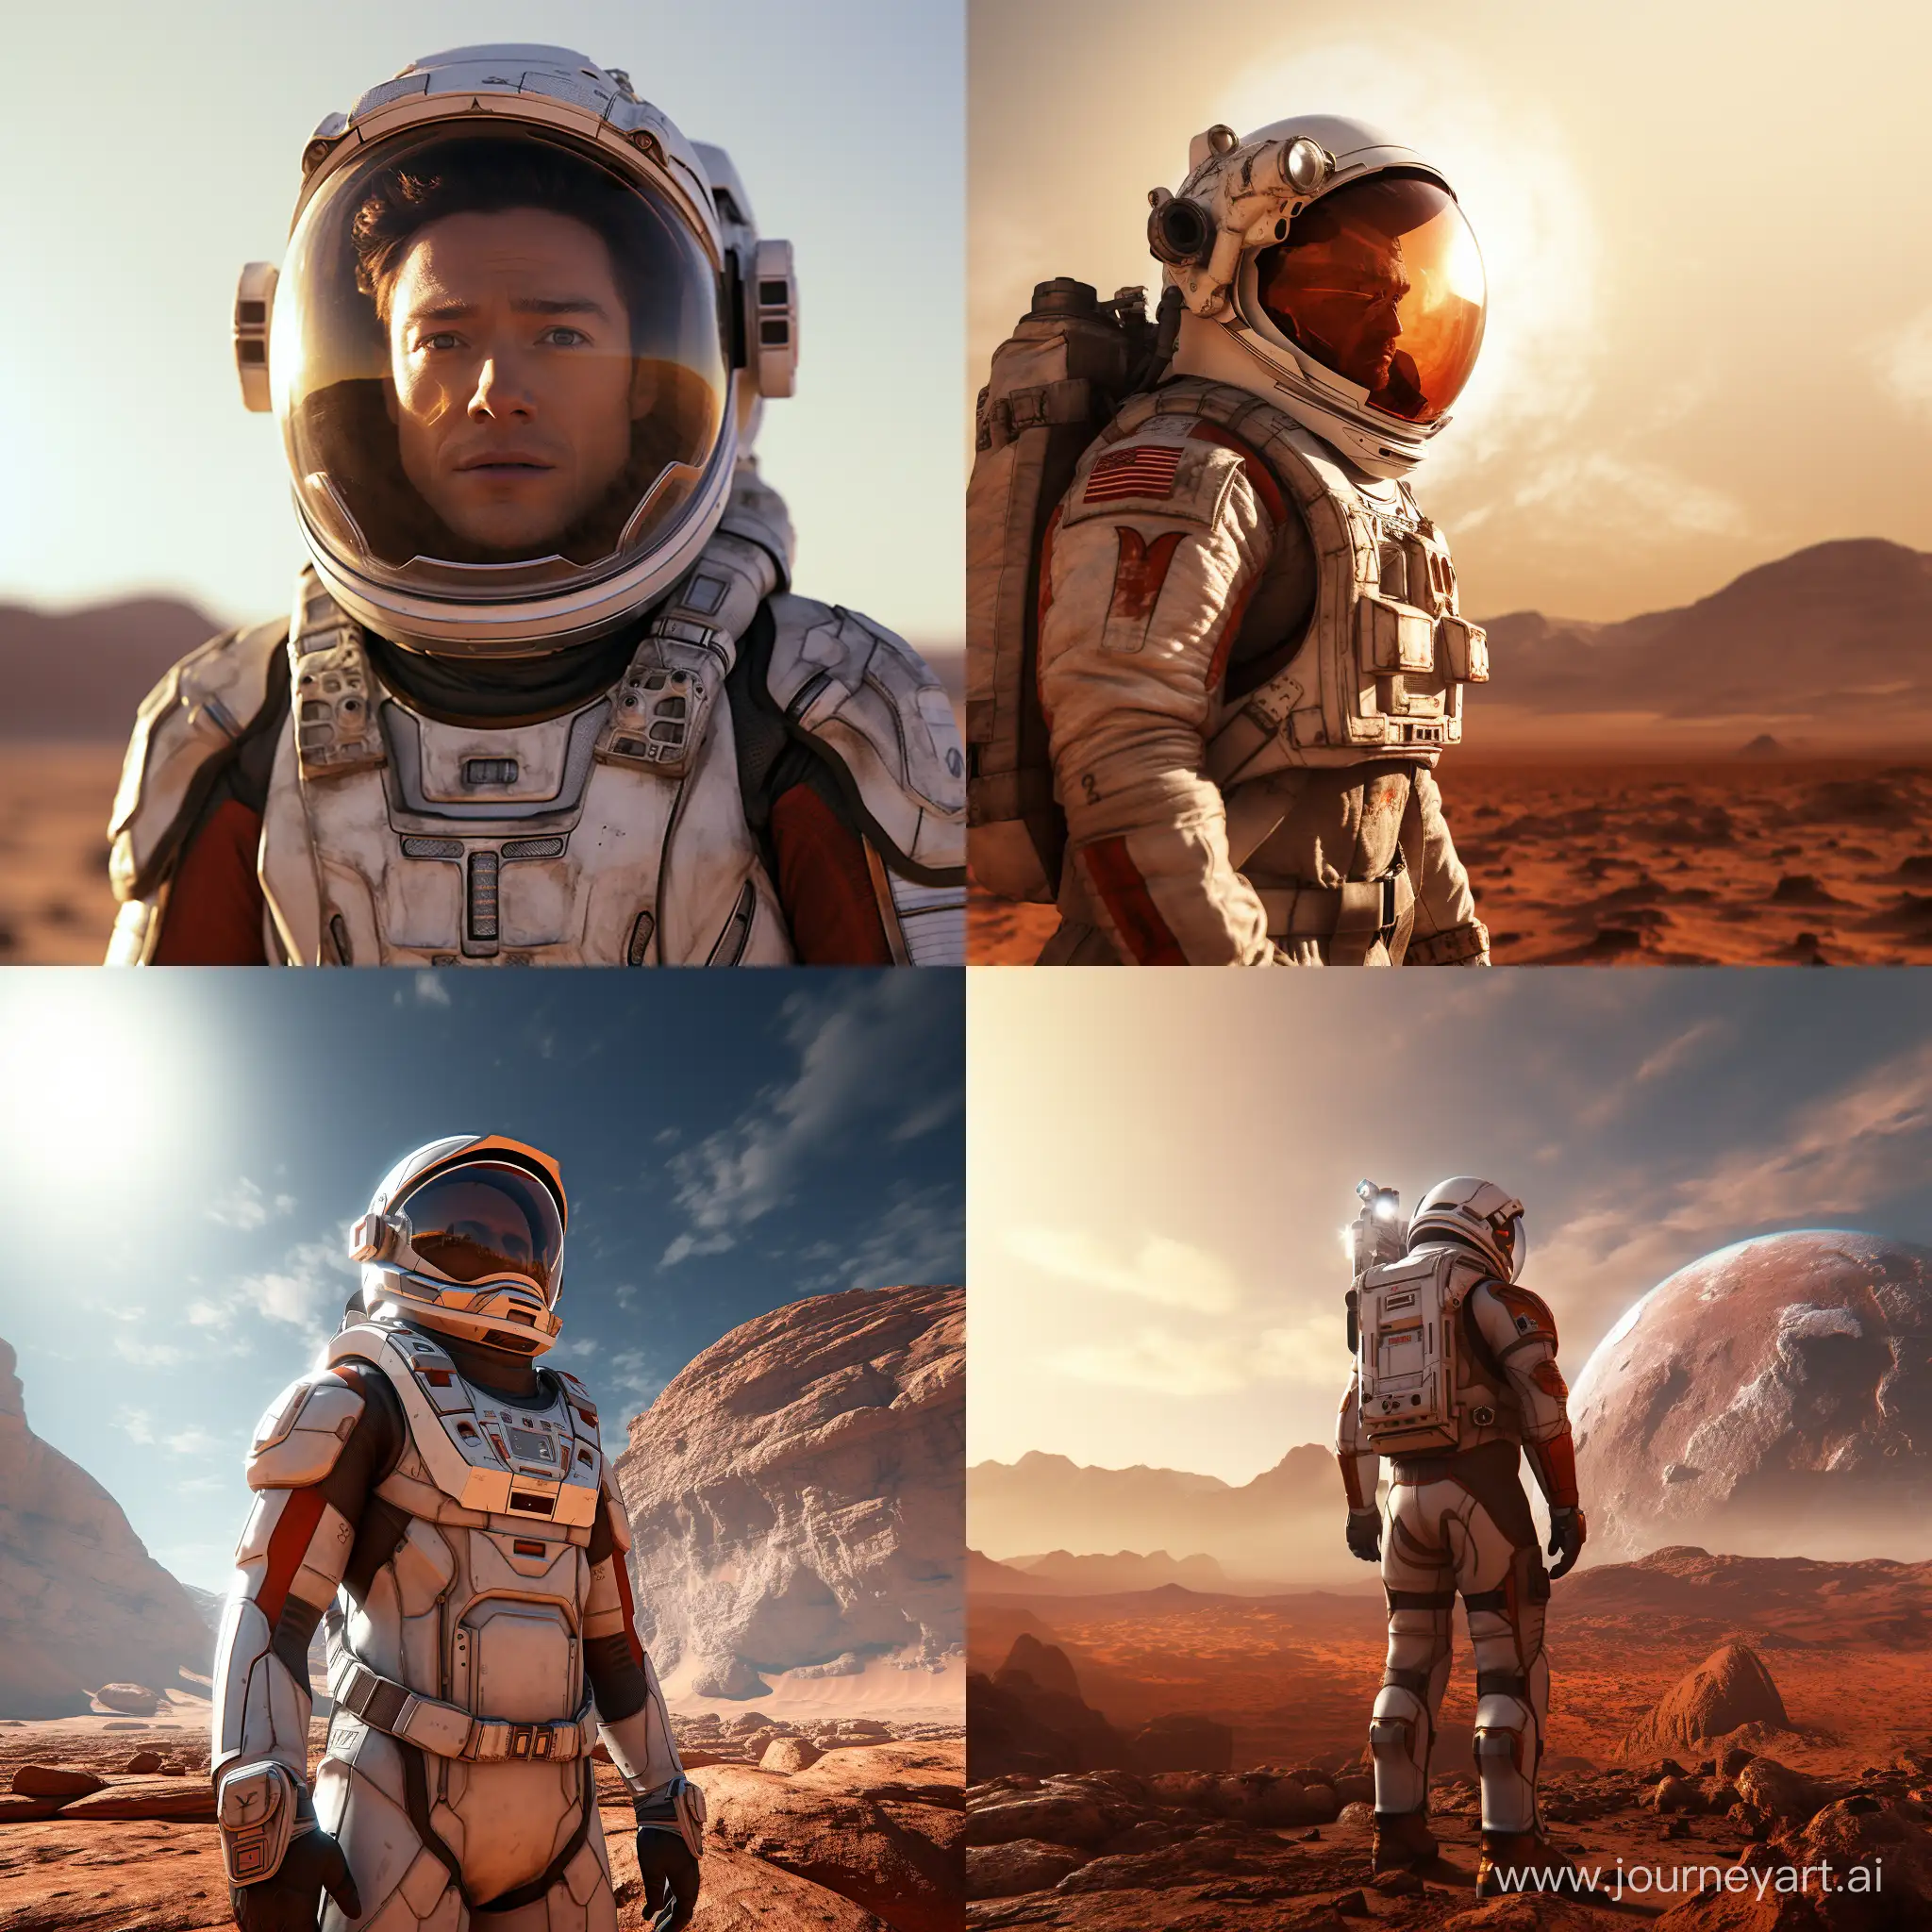 Determined-Astronaut-on-Martian-Surface-in-4K-HD